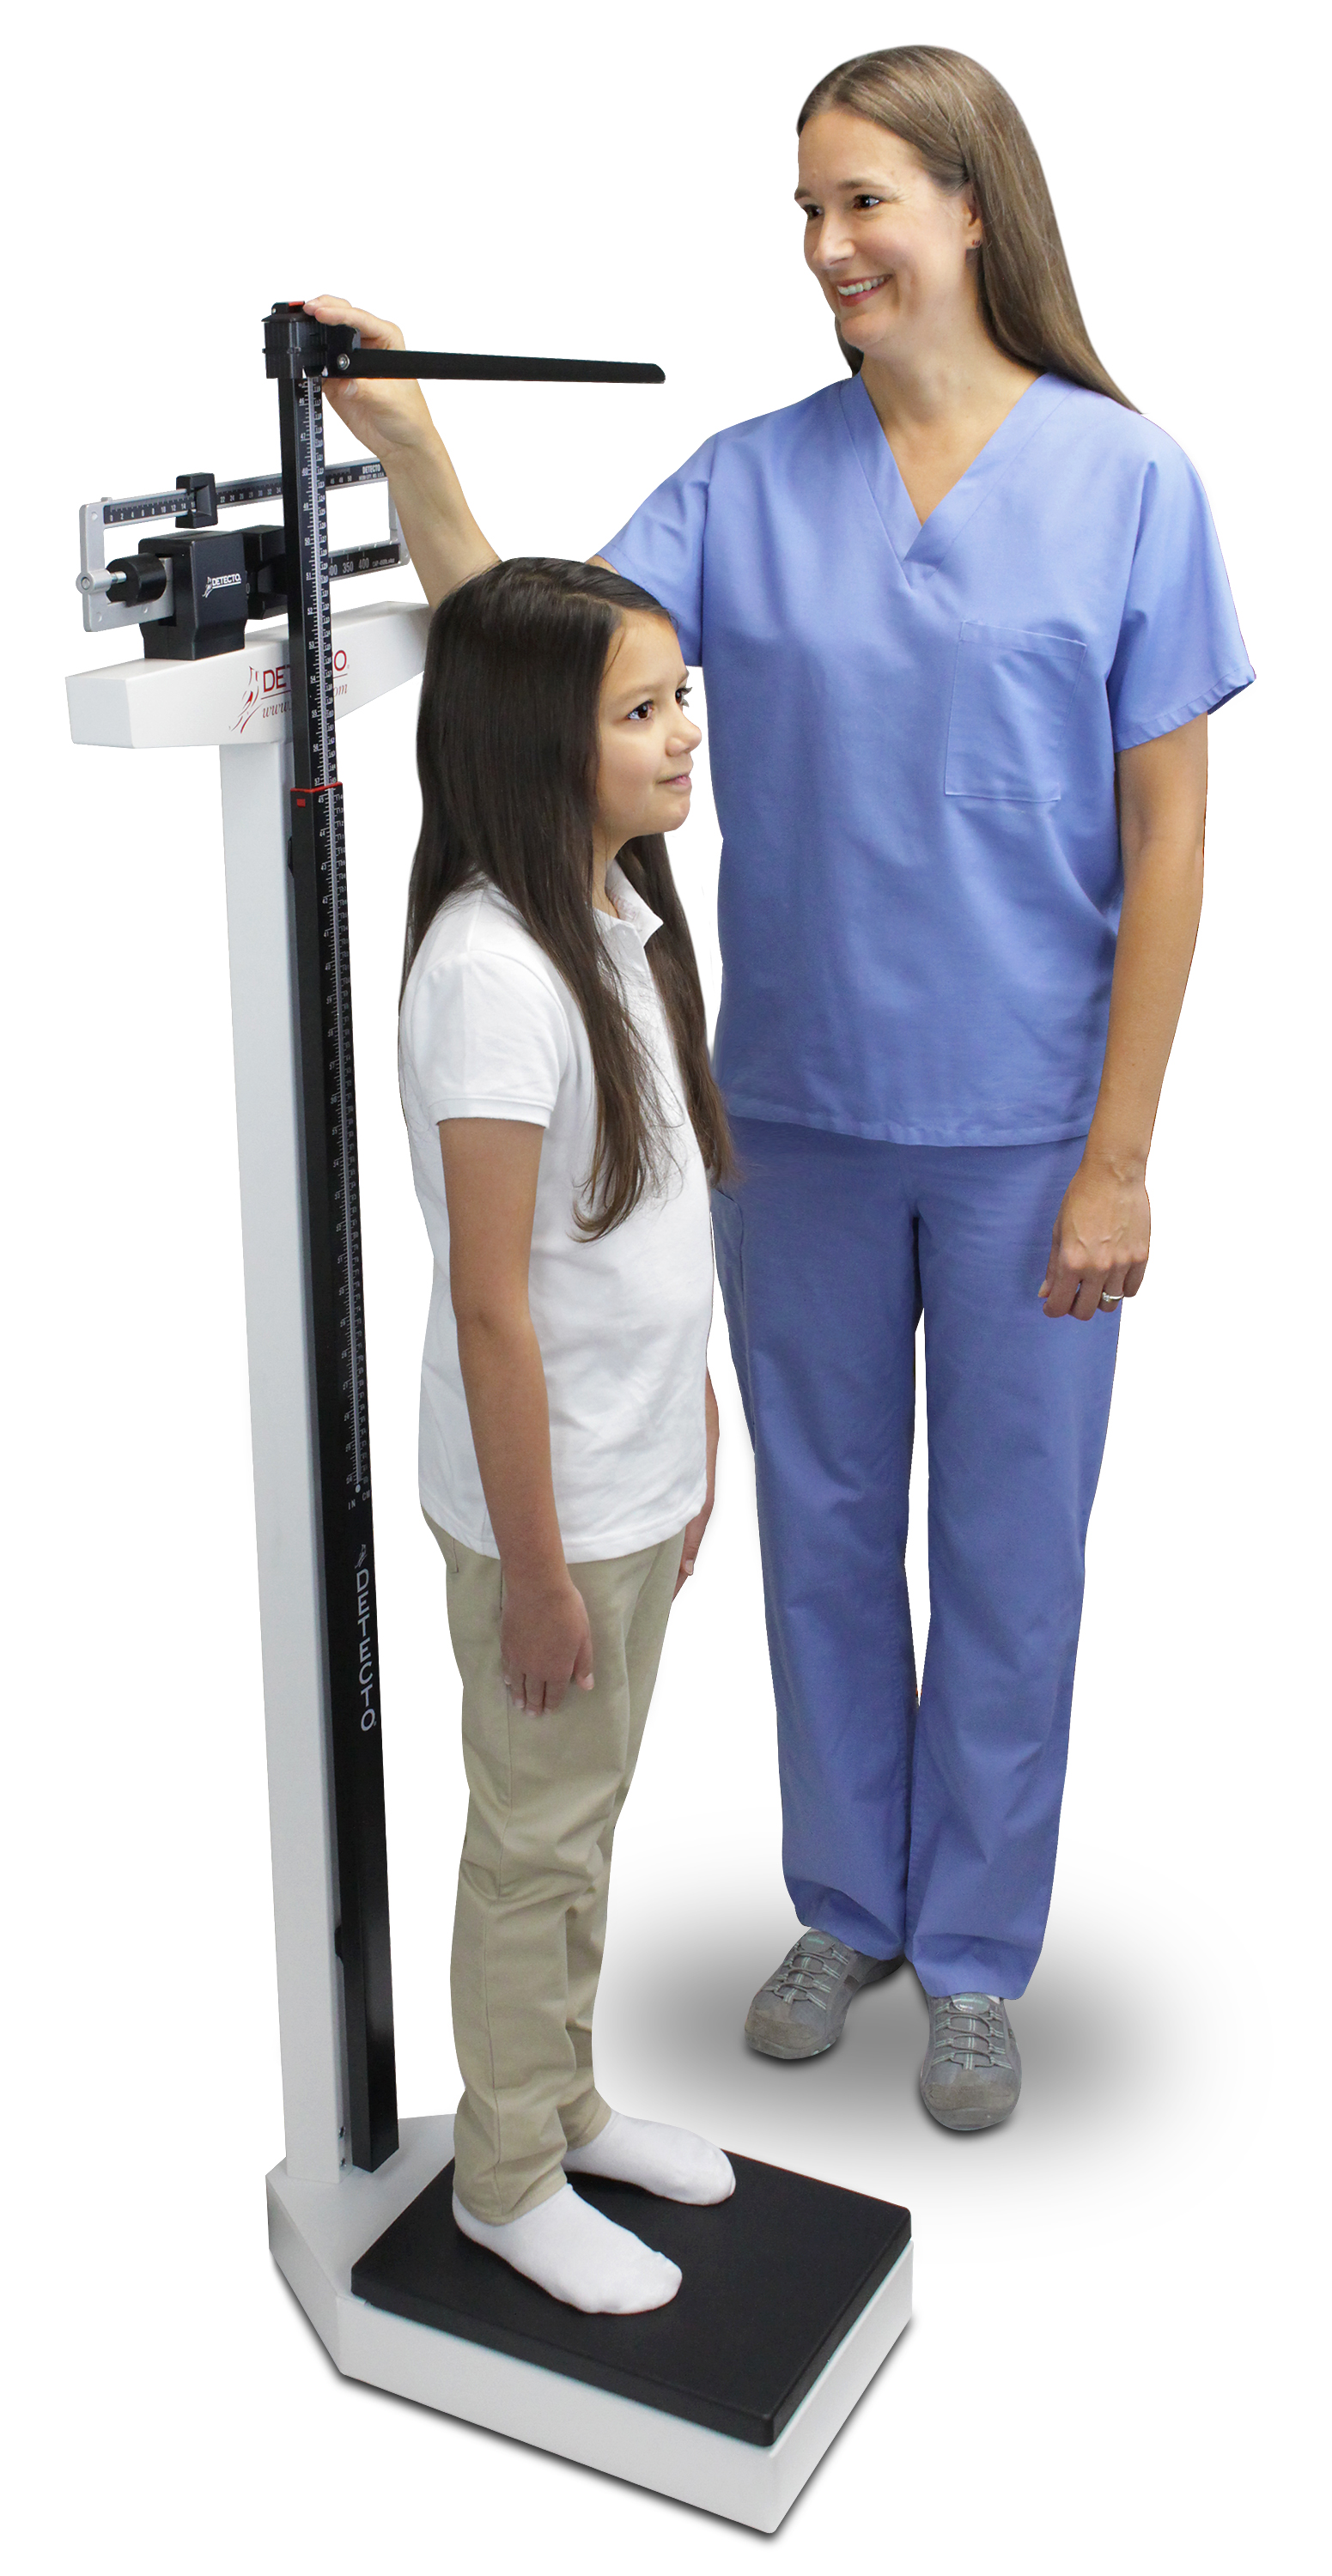 https://cardinalscale.com/themes/ee/site/default/asset/img/product/439-Nurse_Measuring_Height.jpg